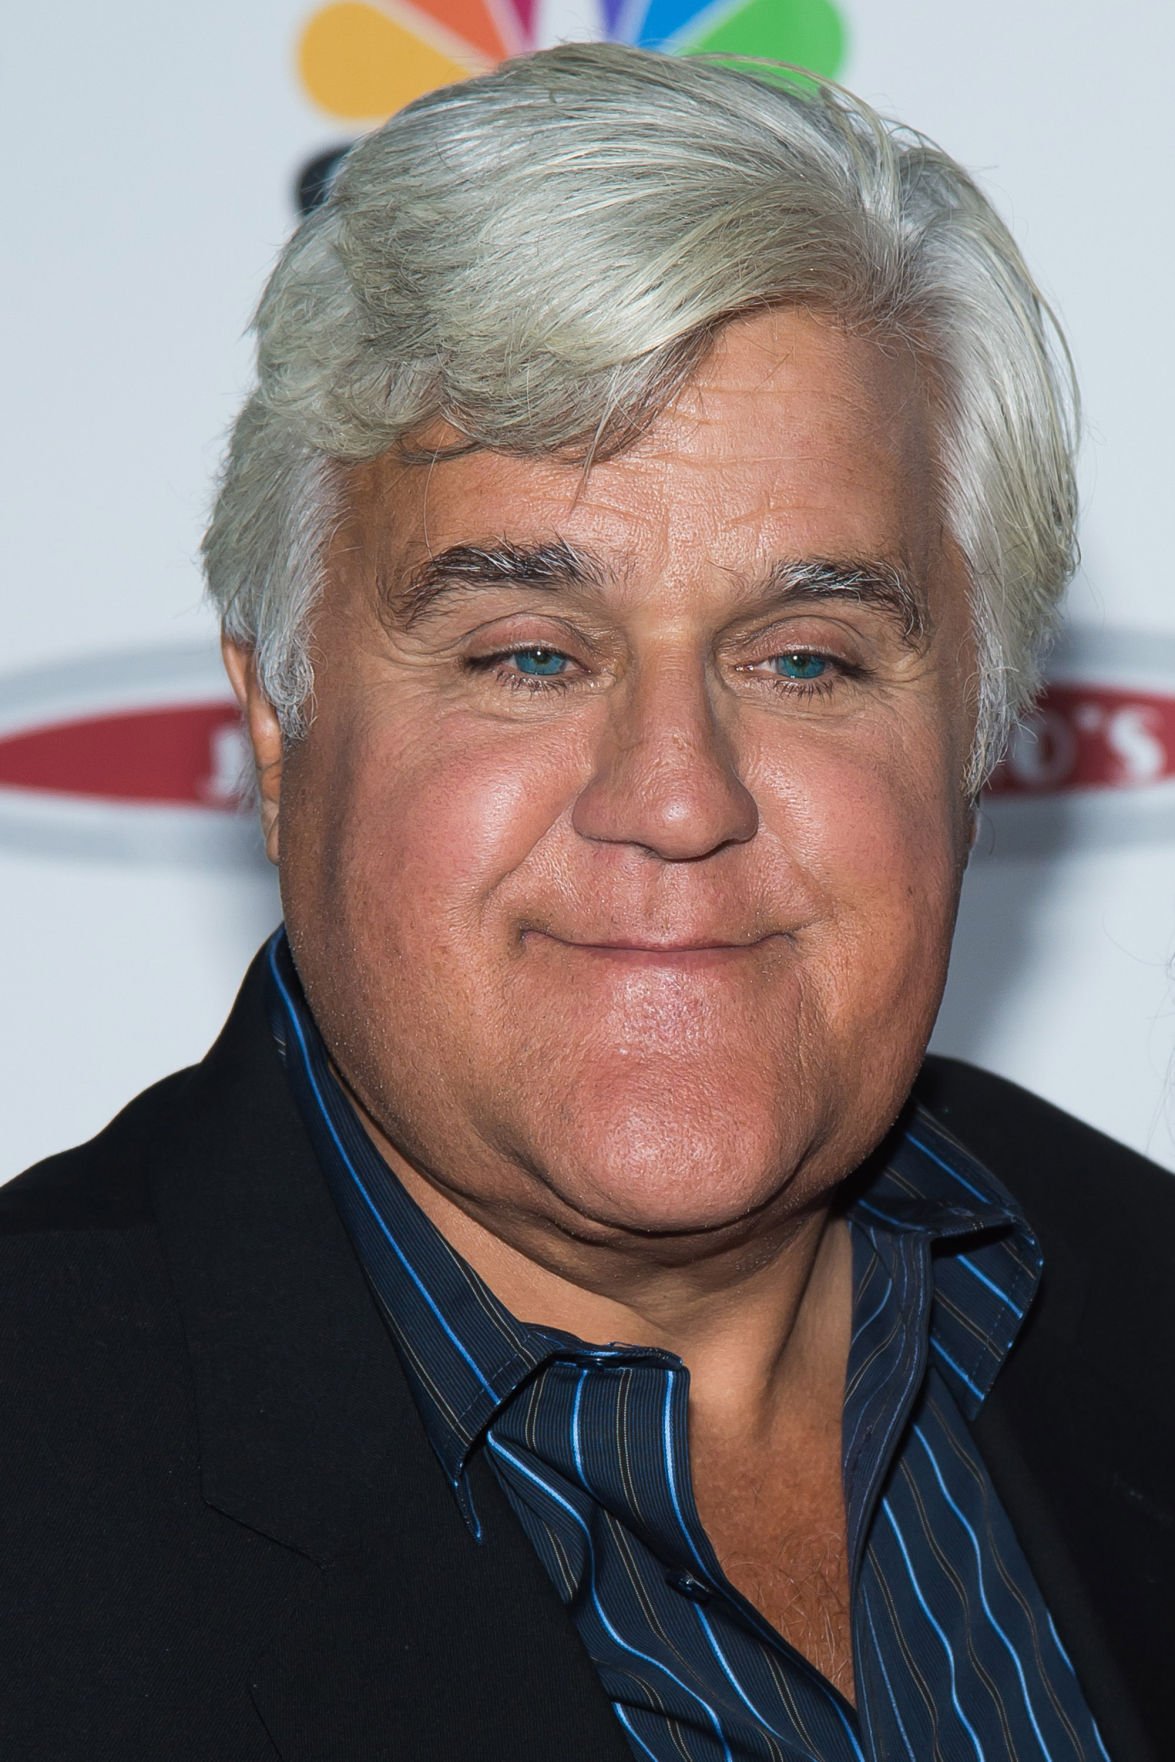 Jay Leno performance moves to civic center's Fine Arts Theatre Local